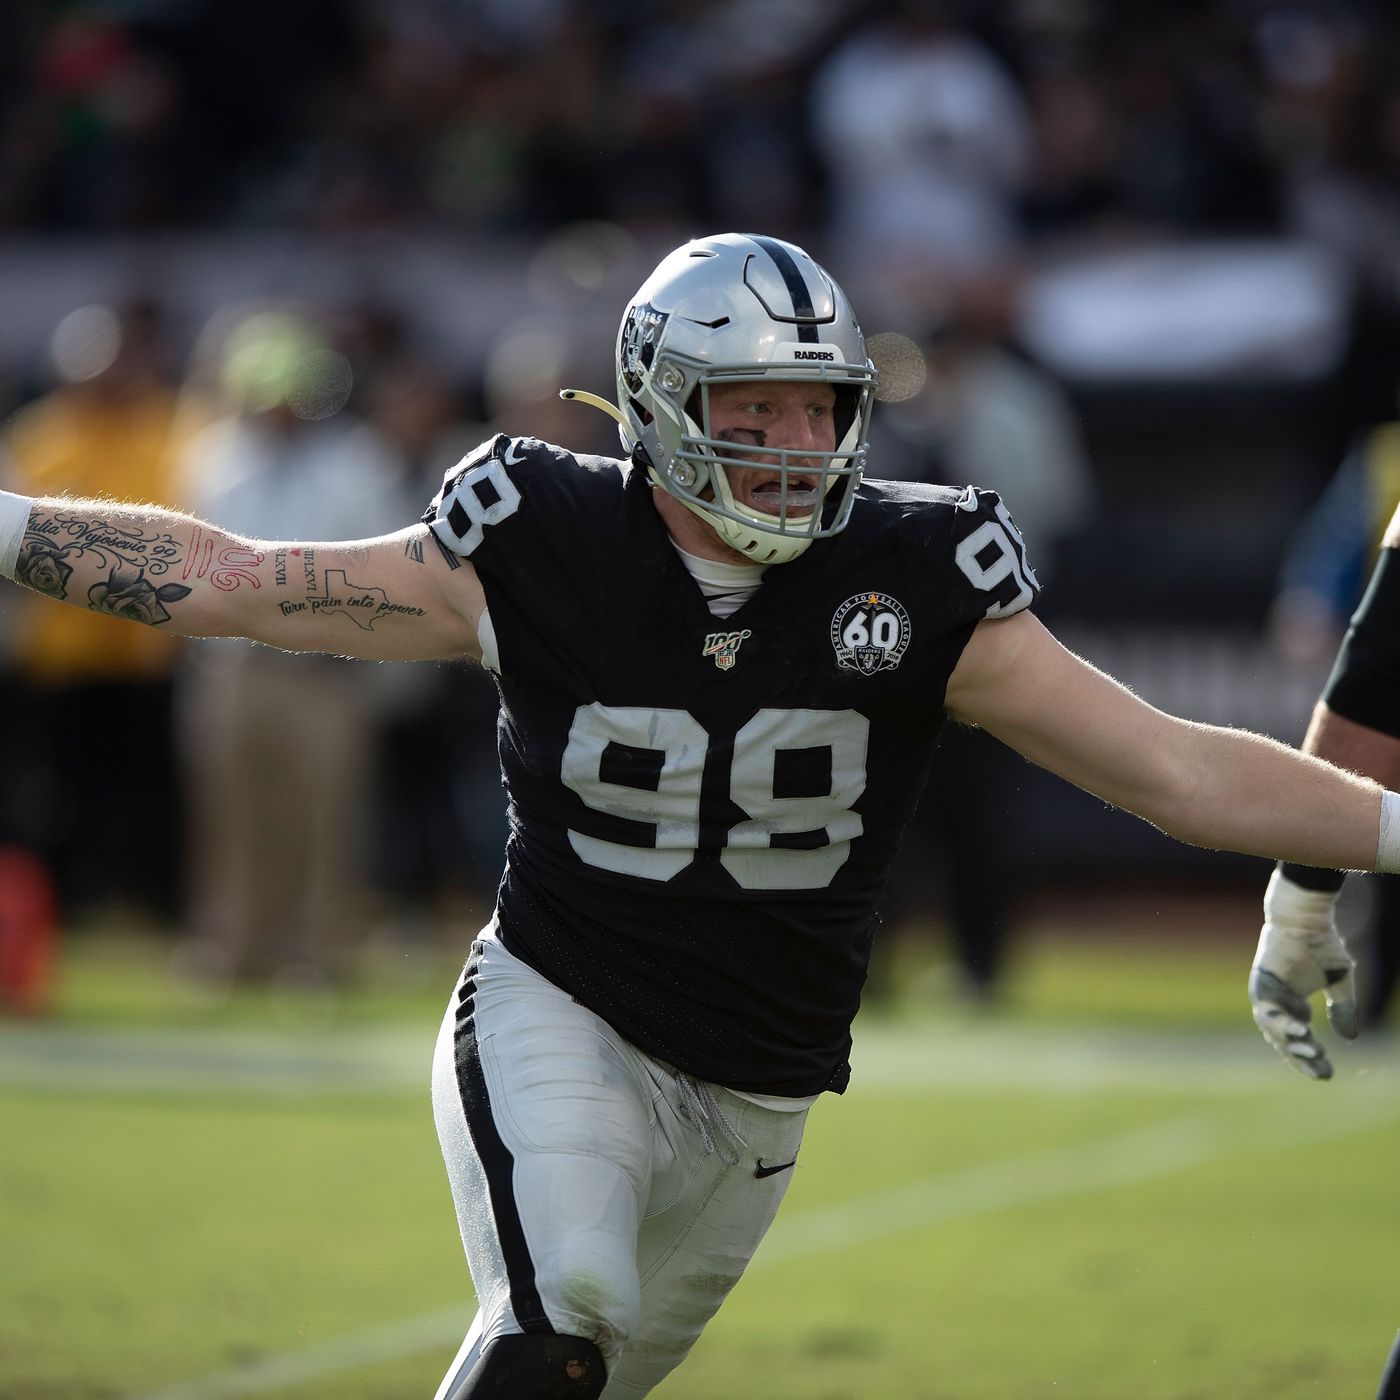 Raiders news: Maxx Crosby is latest young Raider to get team tattoo And Black Pride